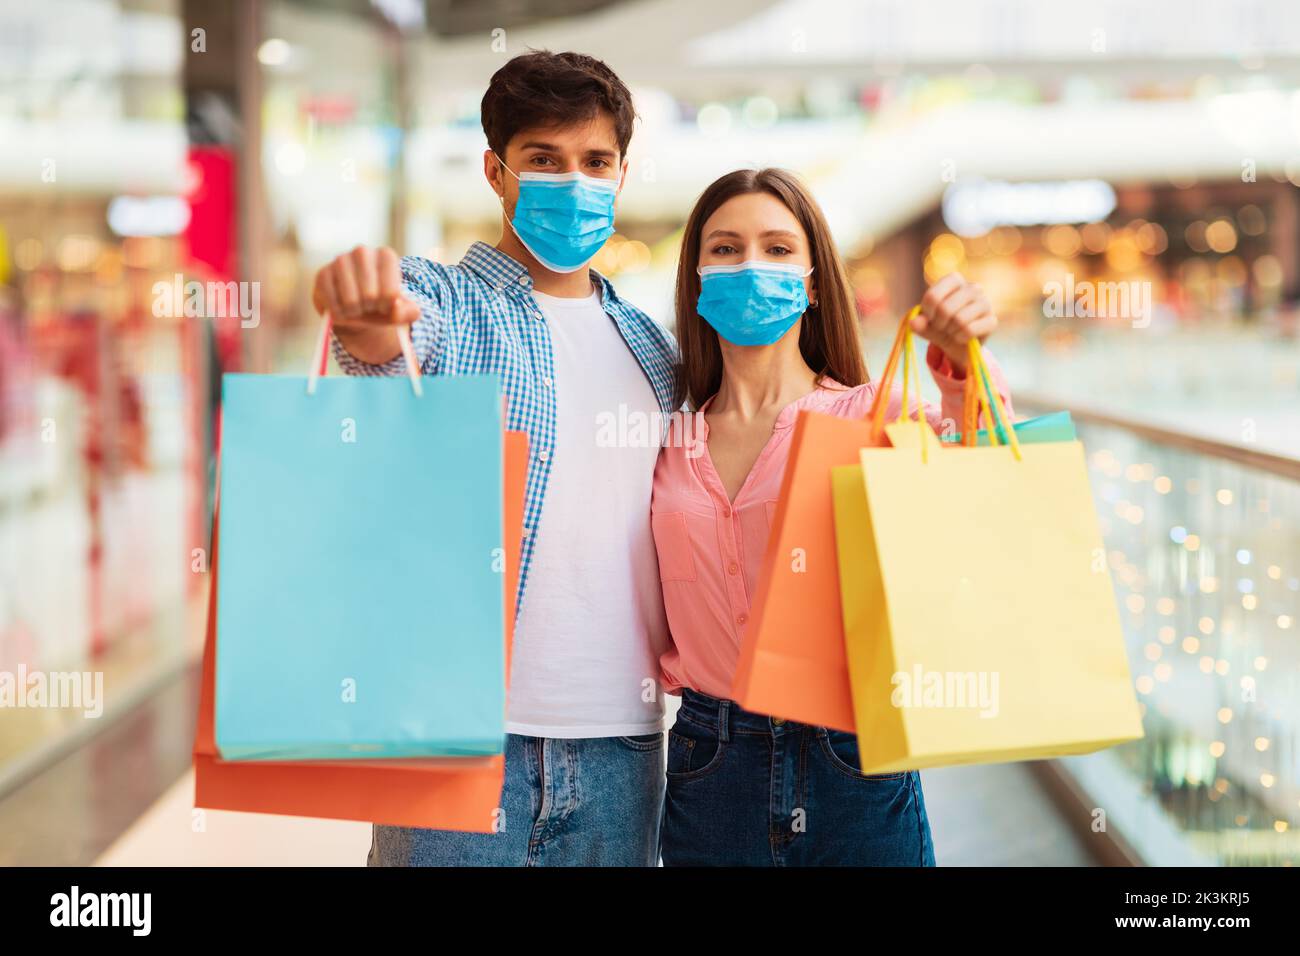 Couple Shopping Showing Shopper Bags Wearing Face Masks In Hypermarket Stock Photo